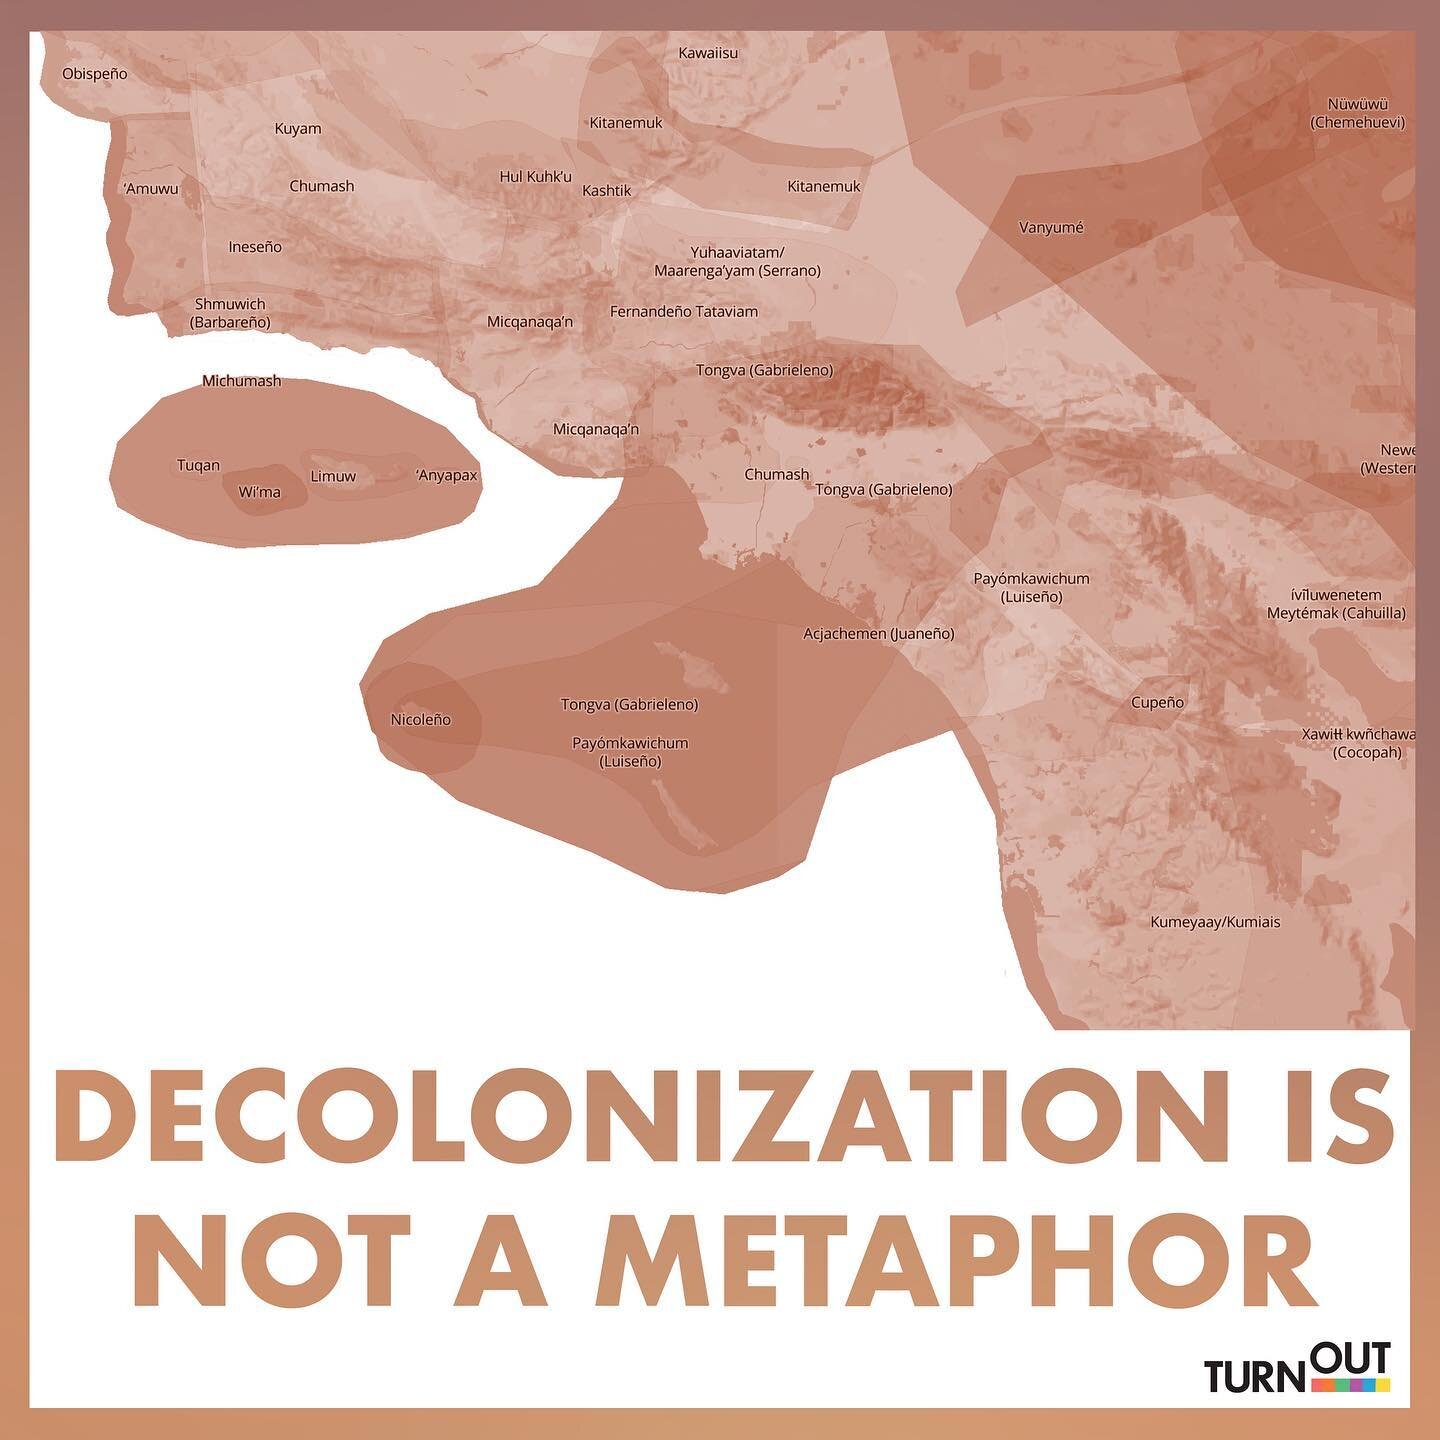 Los Angeles is on Tongva (Gabrielino) and Chumash land. Orange County is on Tongva (Gabrielino) and Acjachemen (Juane&ntilde;o) land. San Diego County is on Kumeyaay land.

Decolonization is not a metaphor - it is not an interchangeable term for impr